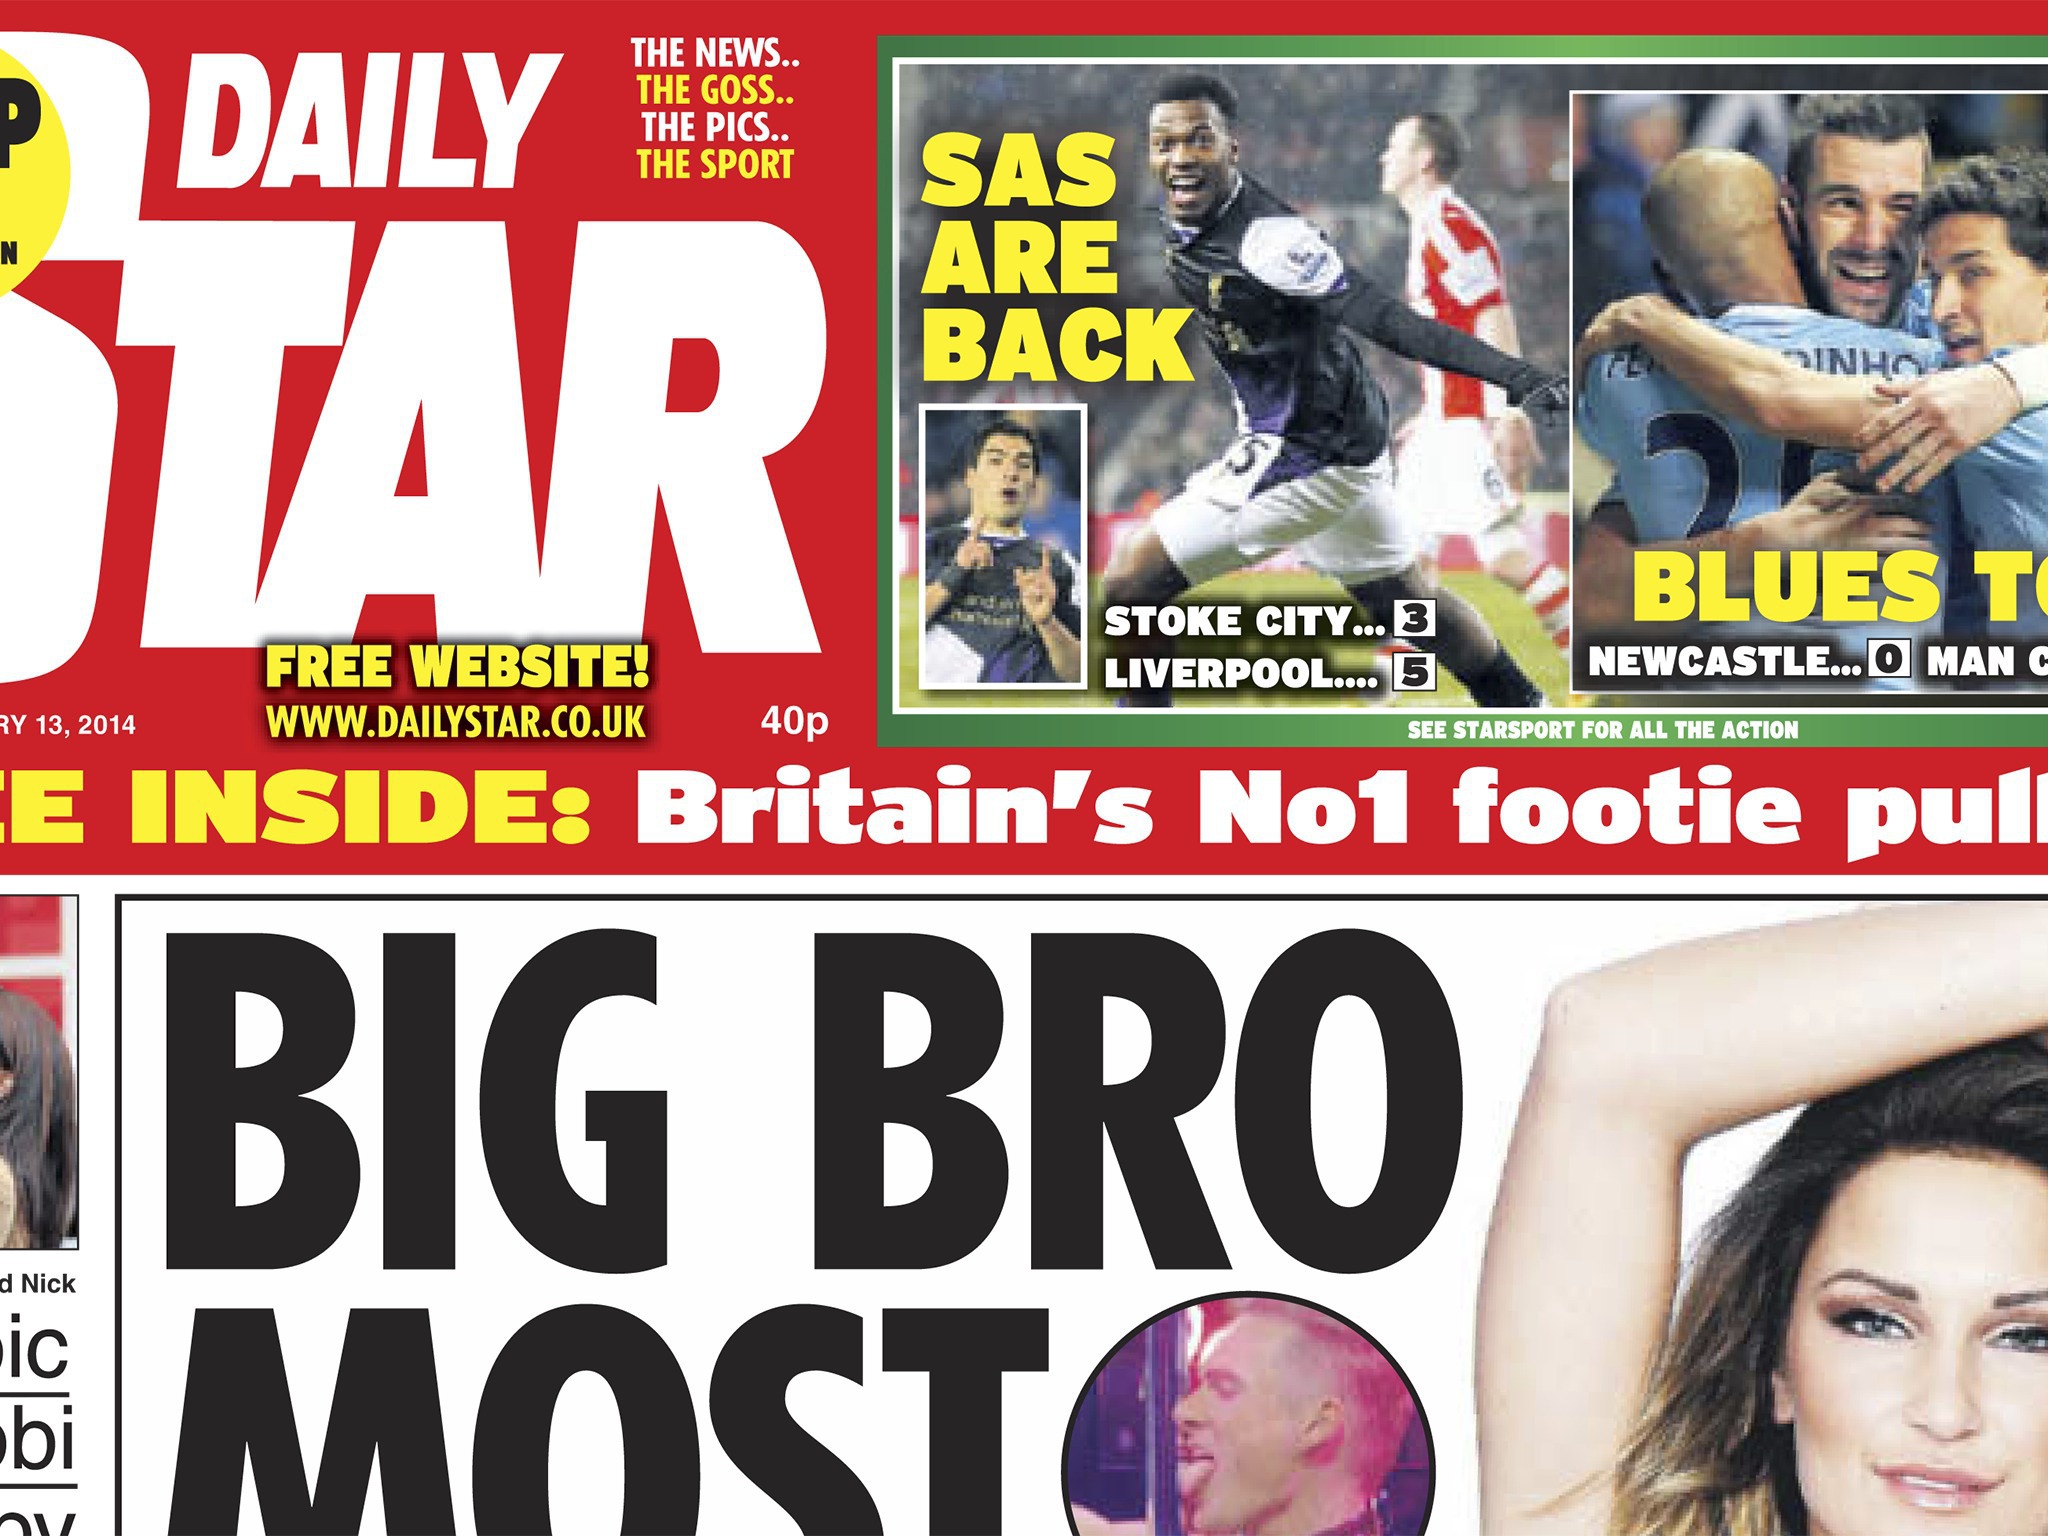 Daily Stars Faux Outrage In Reporting Celebrity Big Brothers Sexy Antics Media The Guardian 